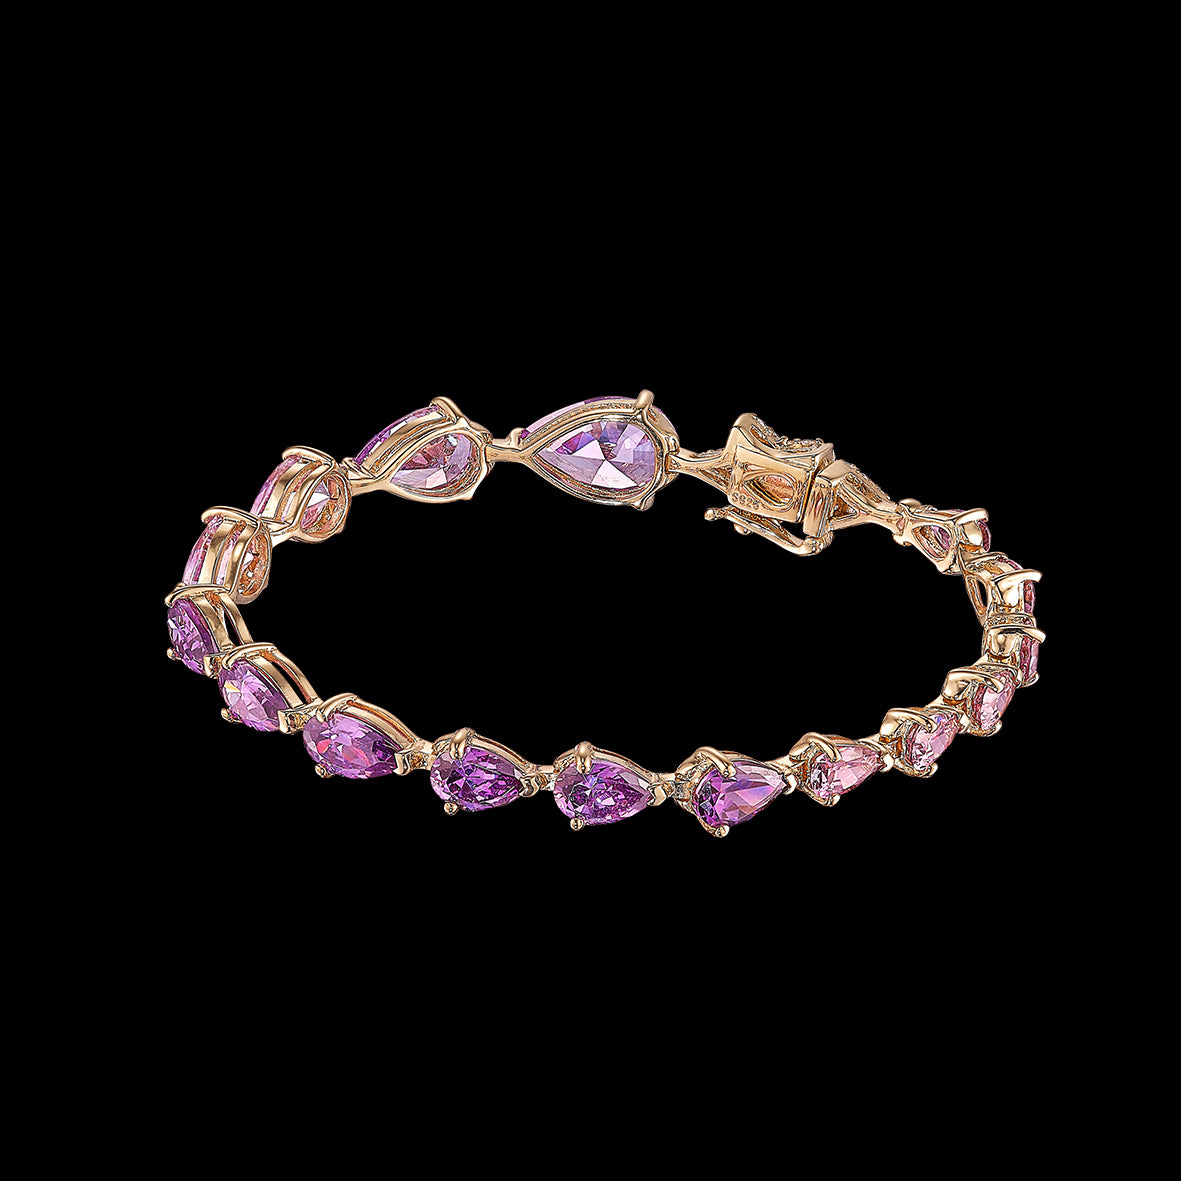 Lilac Nova Bracelet, Bracelet, Anabela Chan Joaillerie - Fine jewelry with laboratory grown and created gemstones hand-crafted in the United Kingdom. Anabela Chan Joaillerie is the first fine jewellery brand in the world to champion laboratory-grown and created gemstones with high jewellery design, artisanal craftsmanship and a focus on ethical and sustainable innovations.